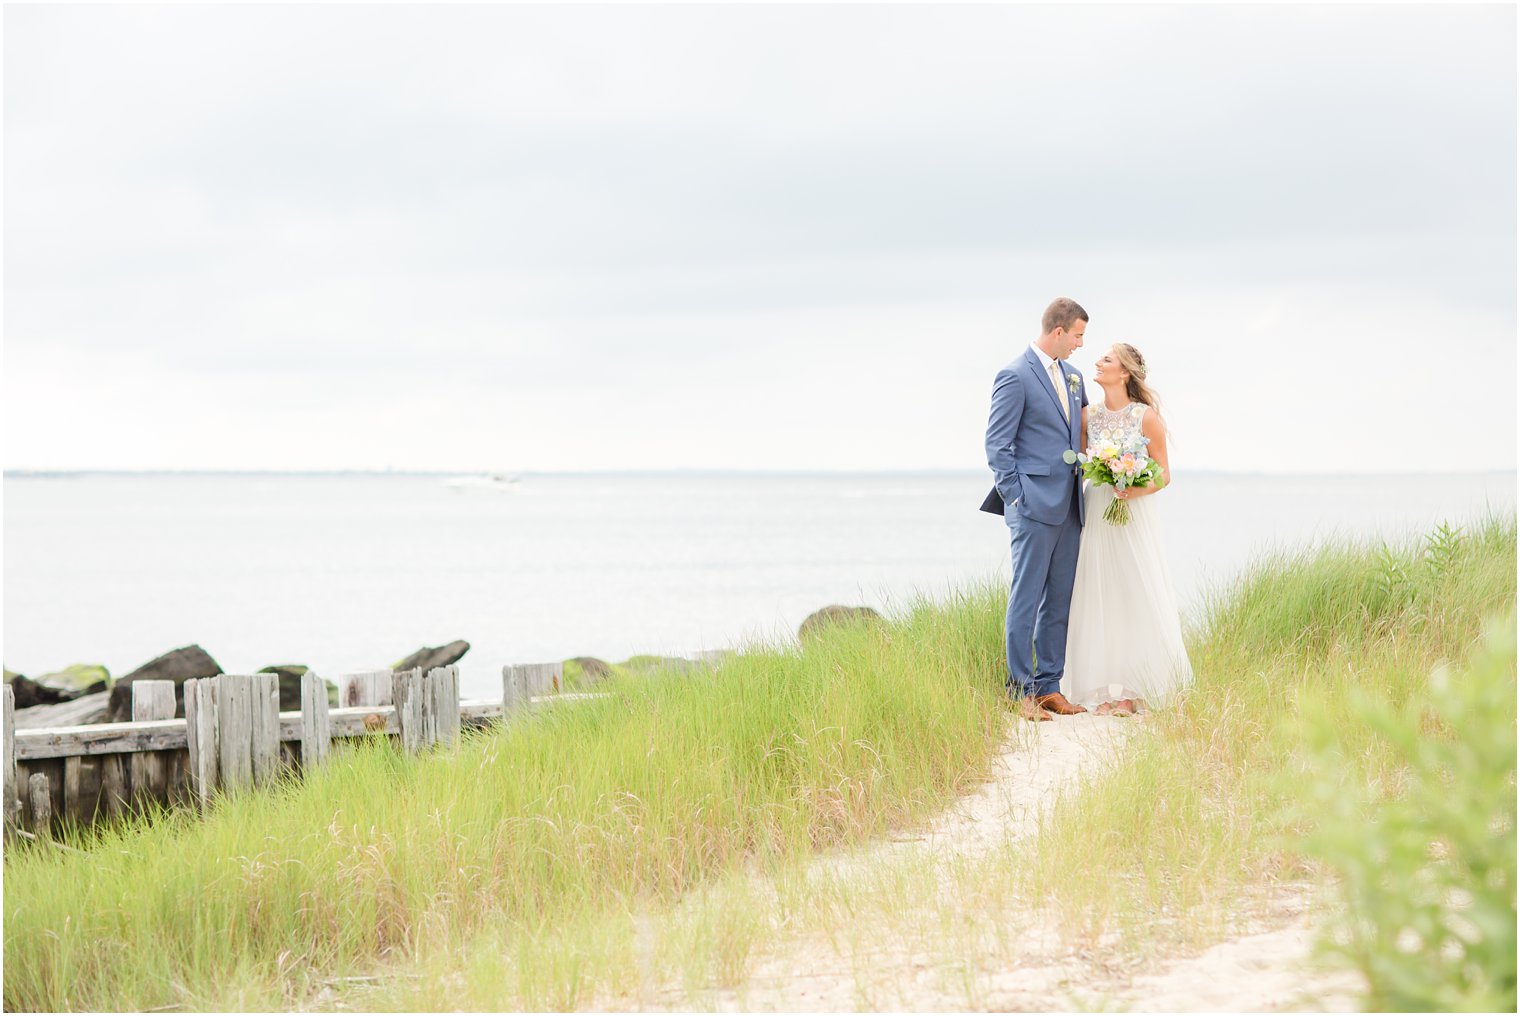 Romantic bride and groom photo at Sandy Hook